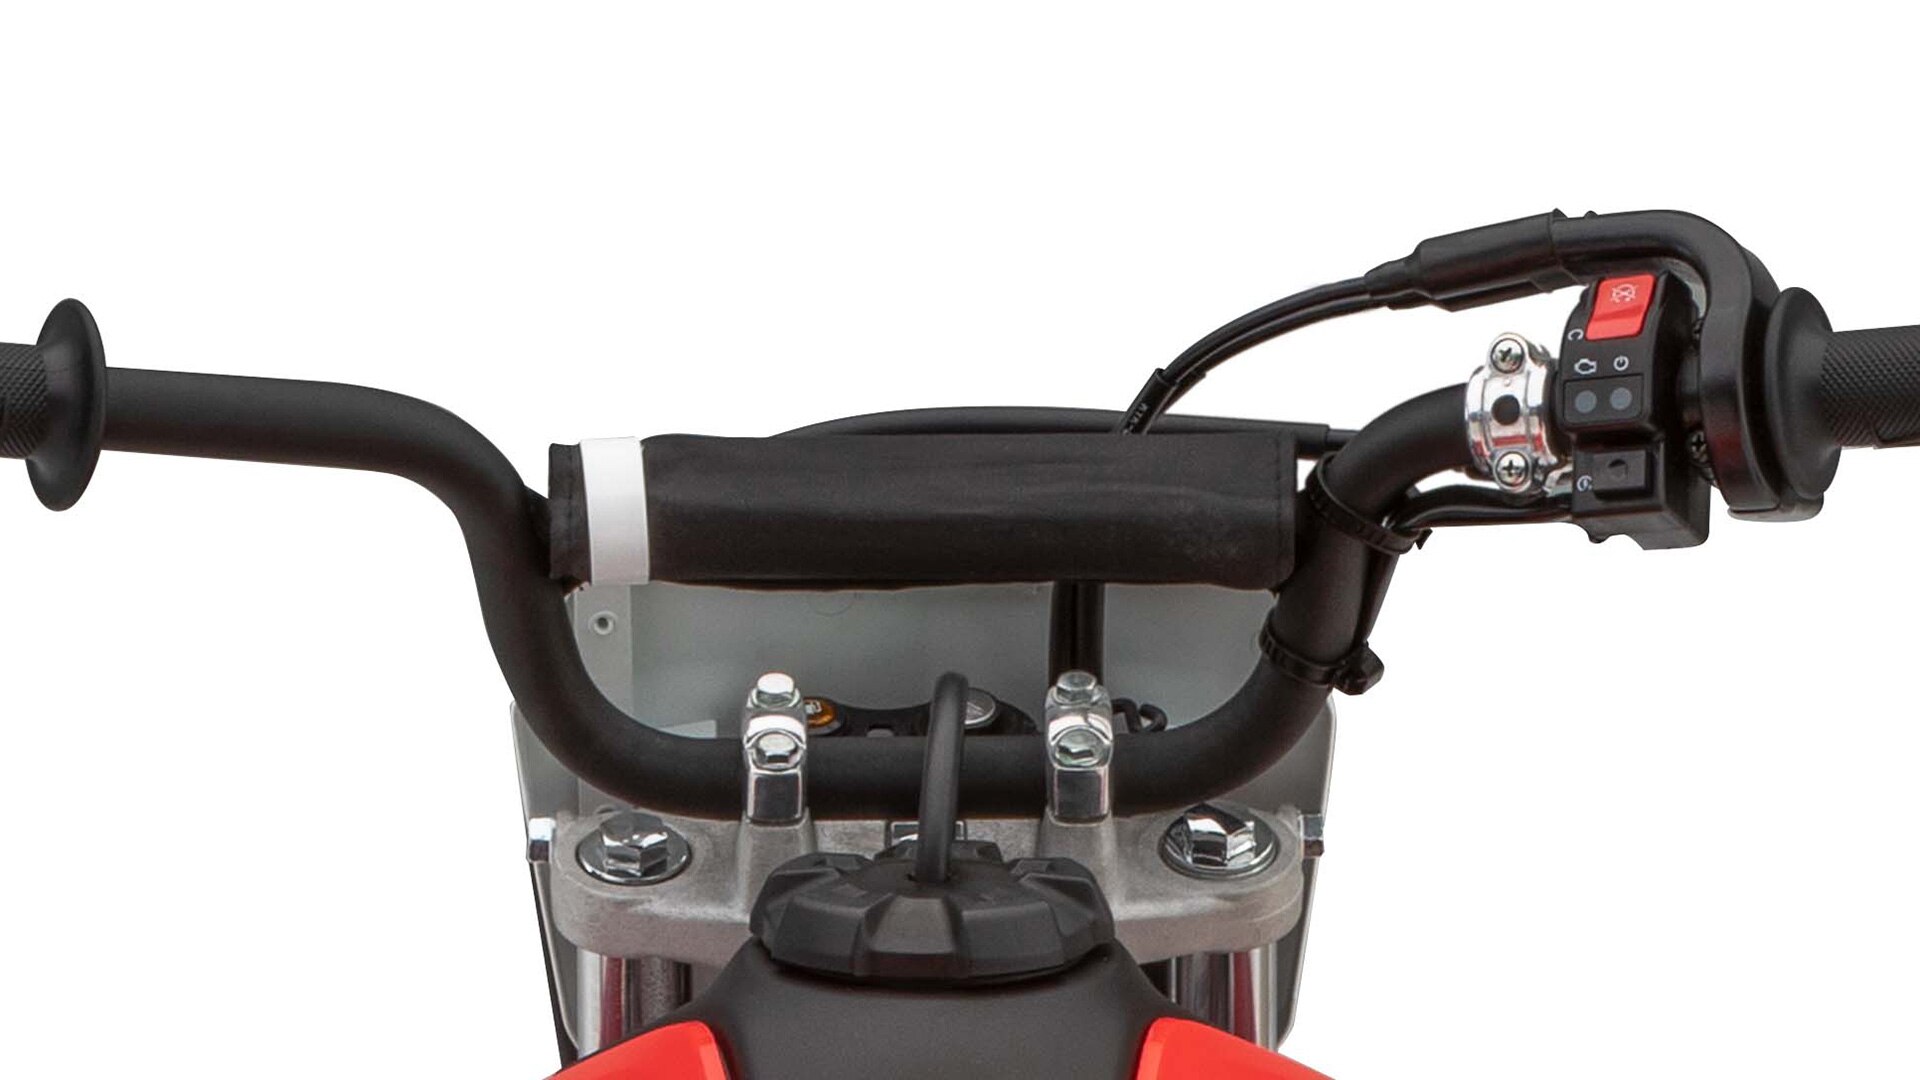 Close-up on front handle bars and ignition